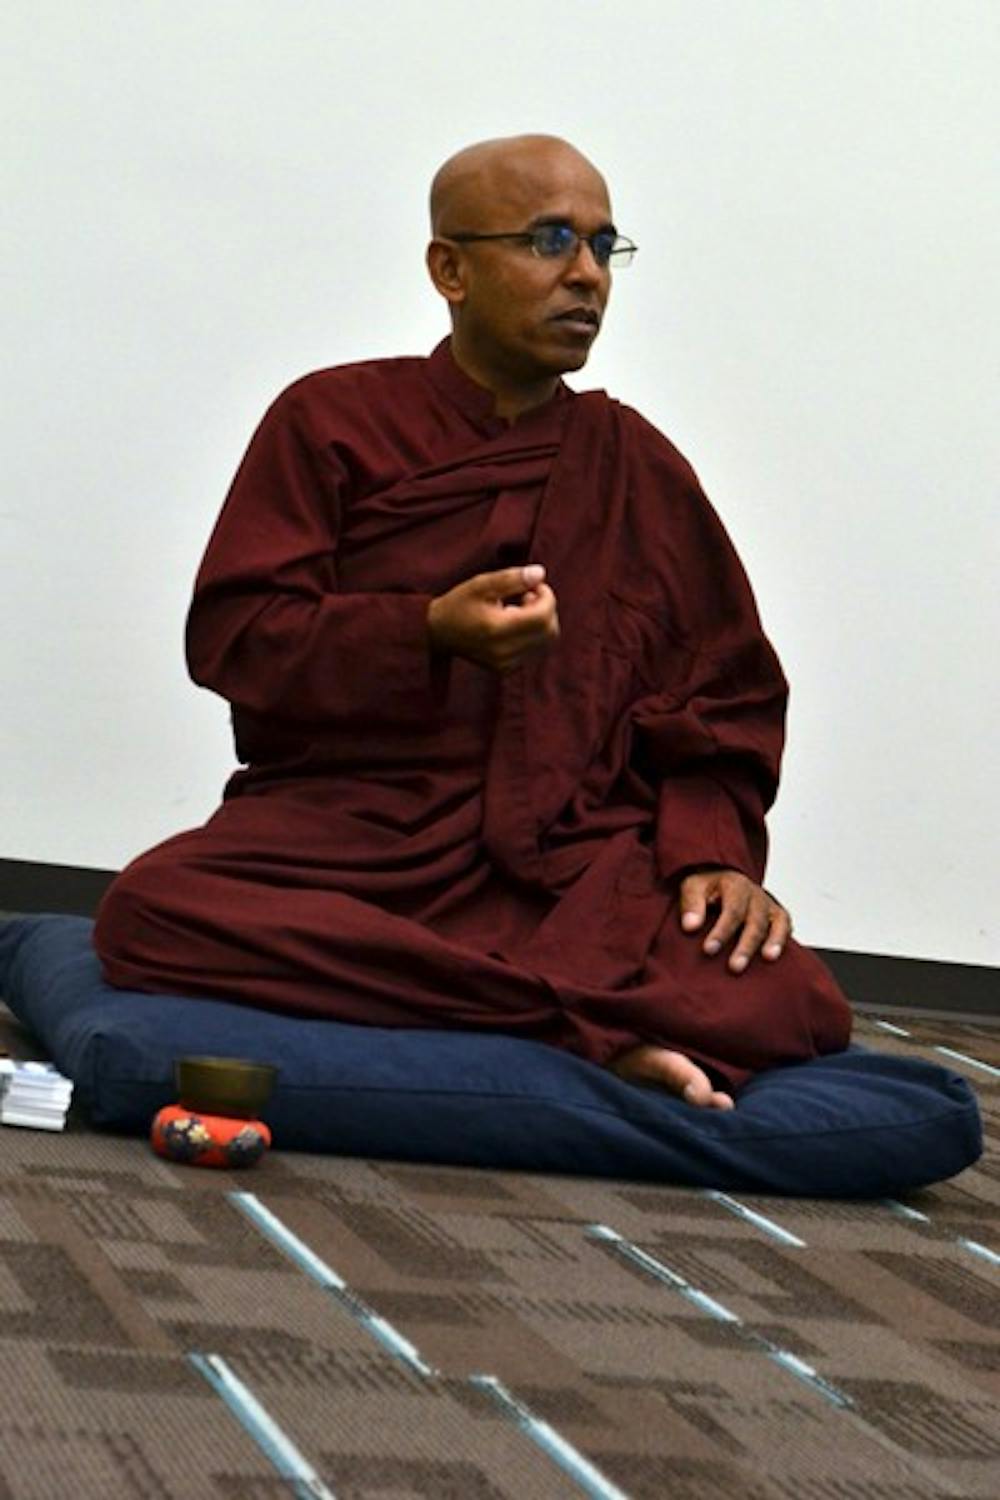 Buddhist Sangha Upasaka Culadasa clarifies the meaning behind meditation to a small group of participants in the Nursing and Health Innovation building on the Downtown campus Thursday afternoon. (Photo by Brittany Lea)